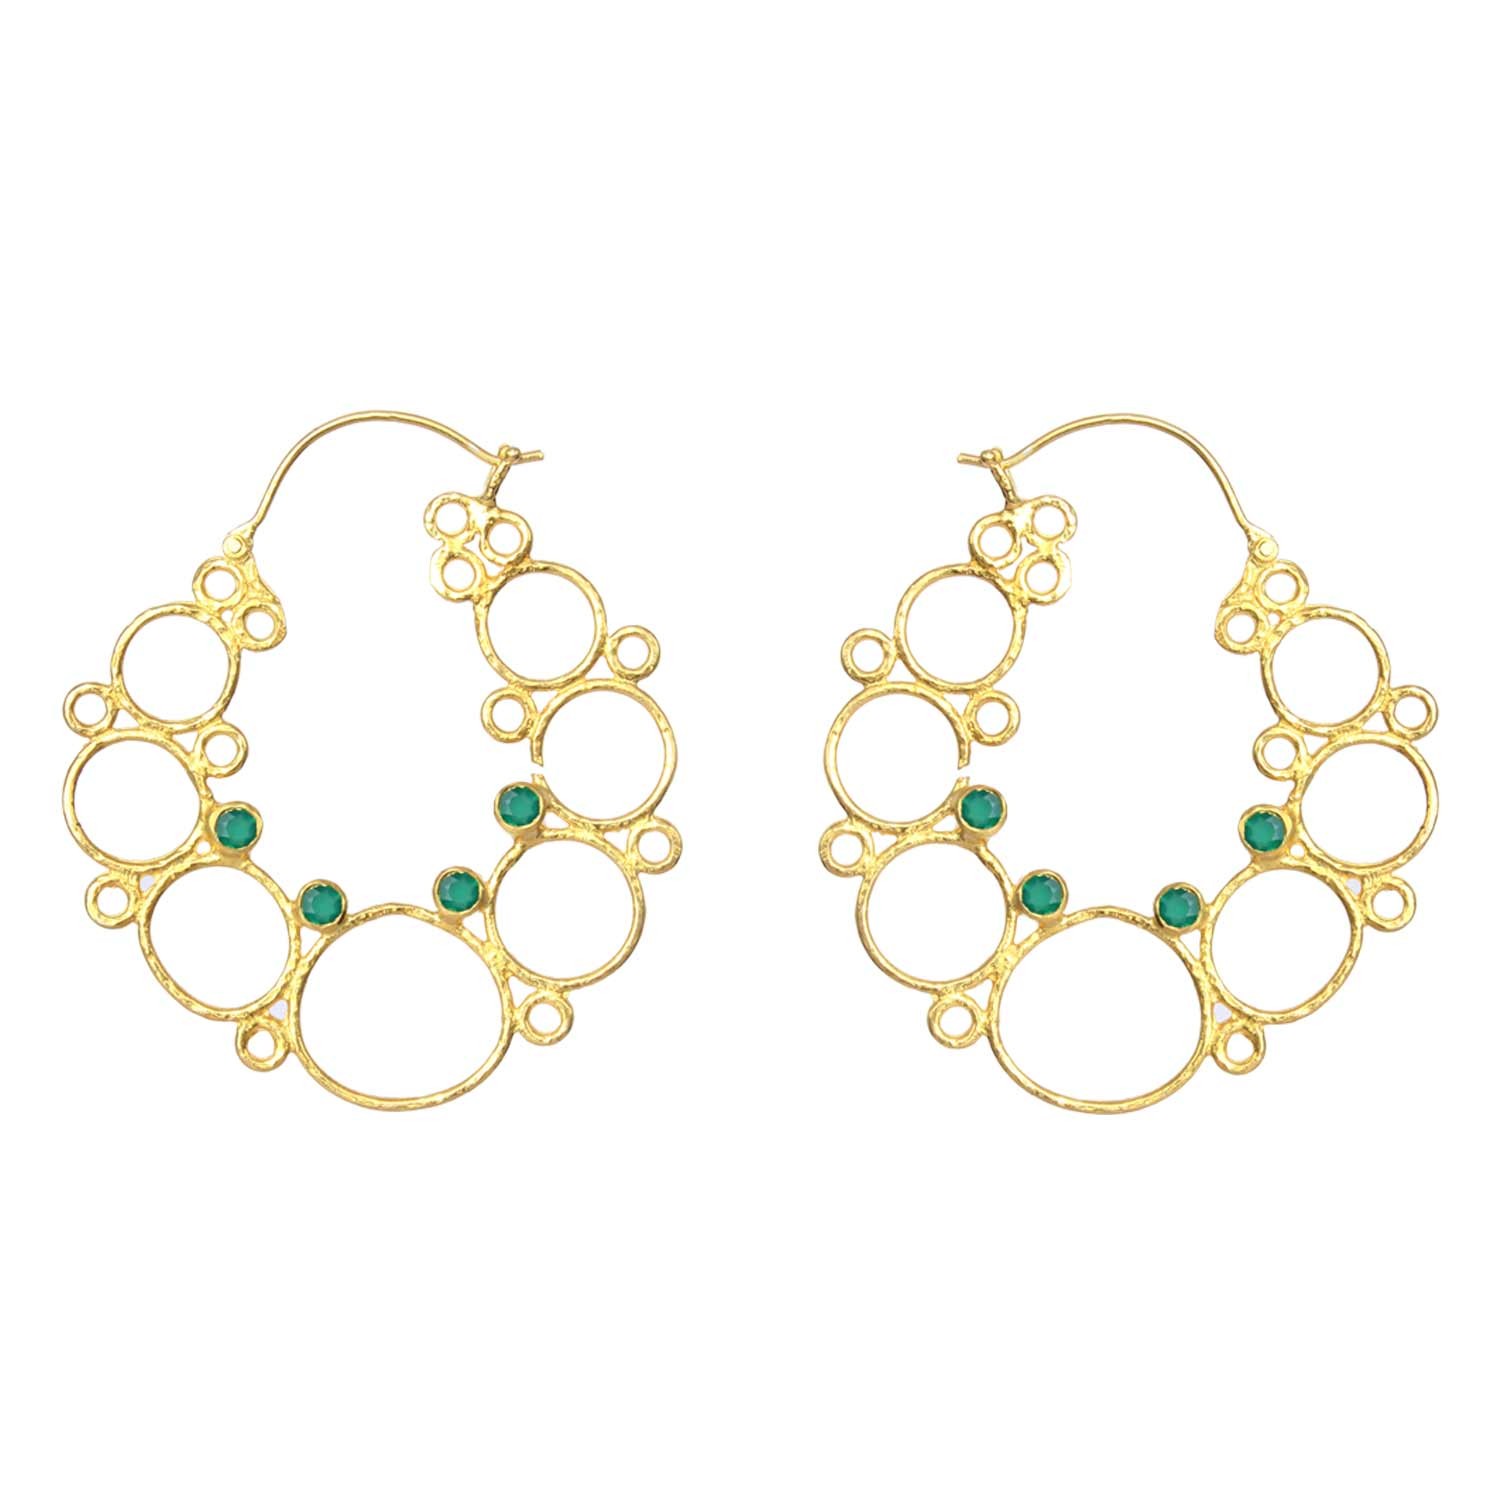 Gold Plated Green Onyx Silver Hoops